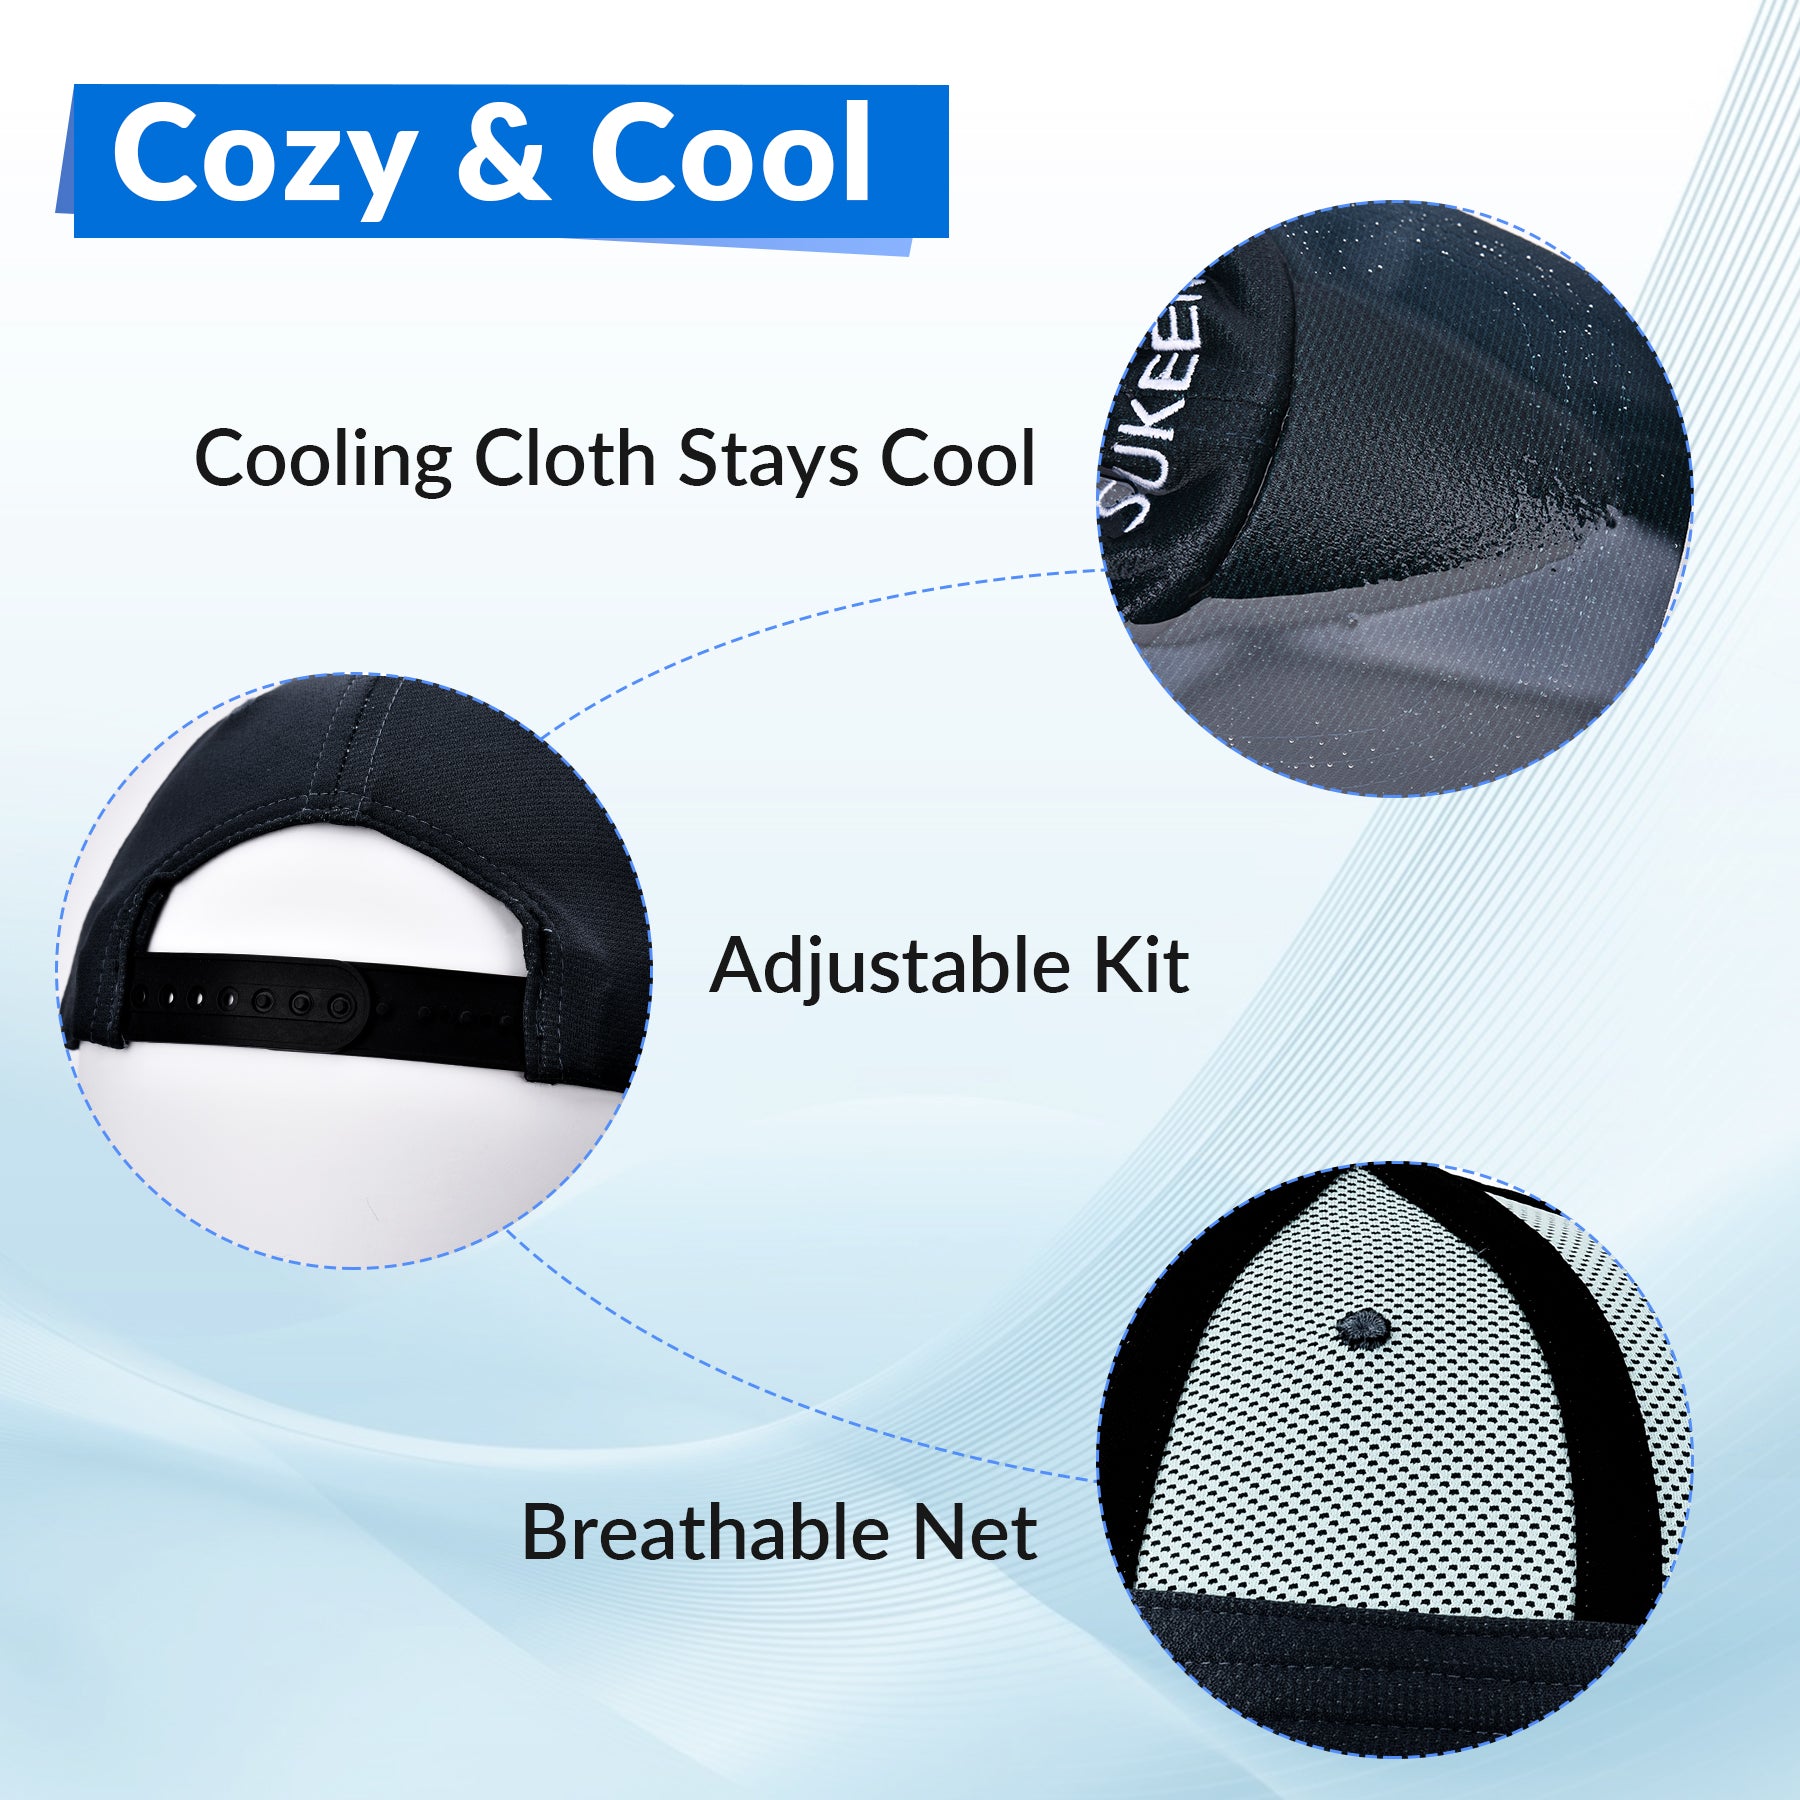 Sukeen Cooling Hat Summit Hat Breathable Net IceCap®